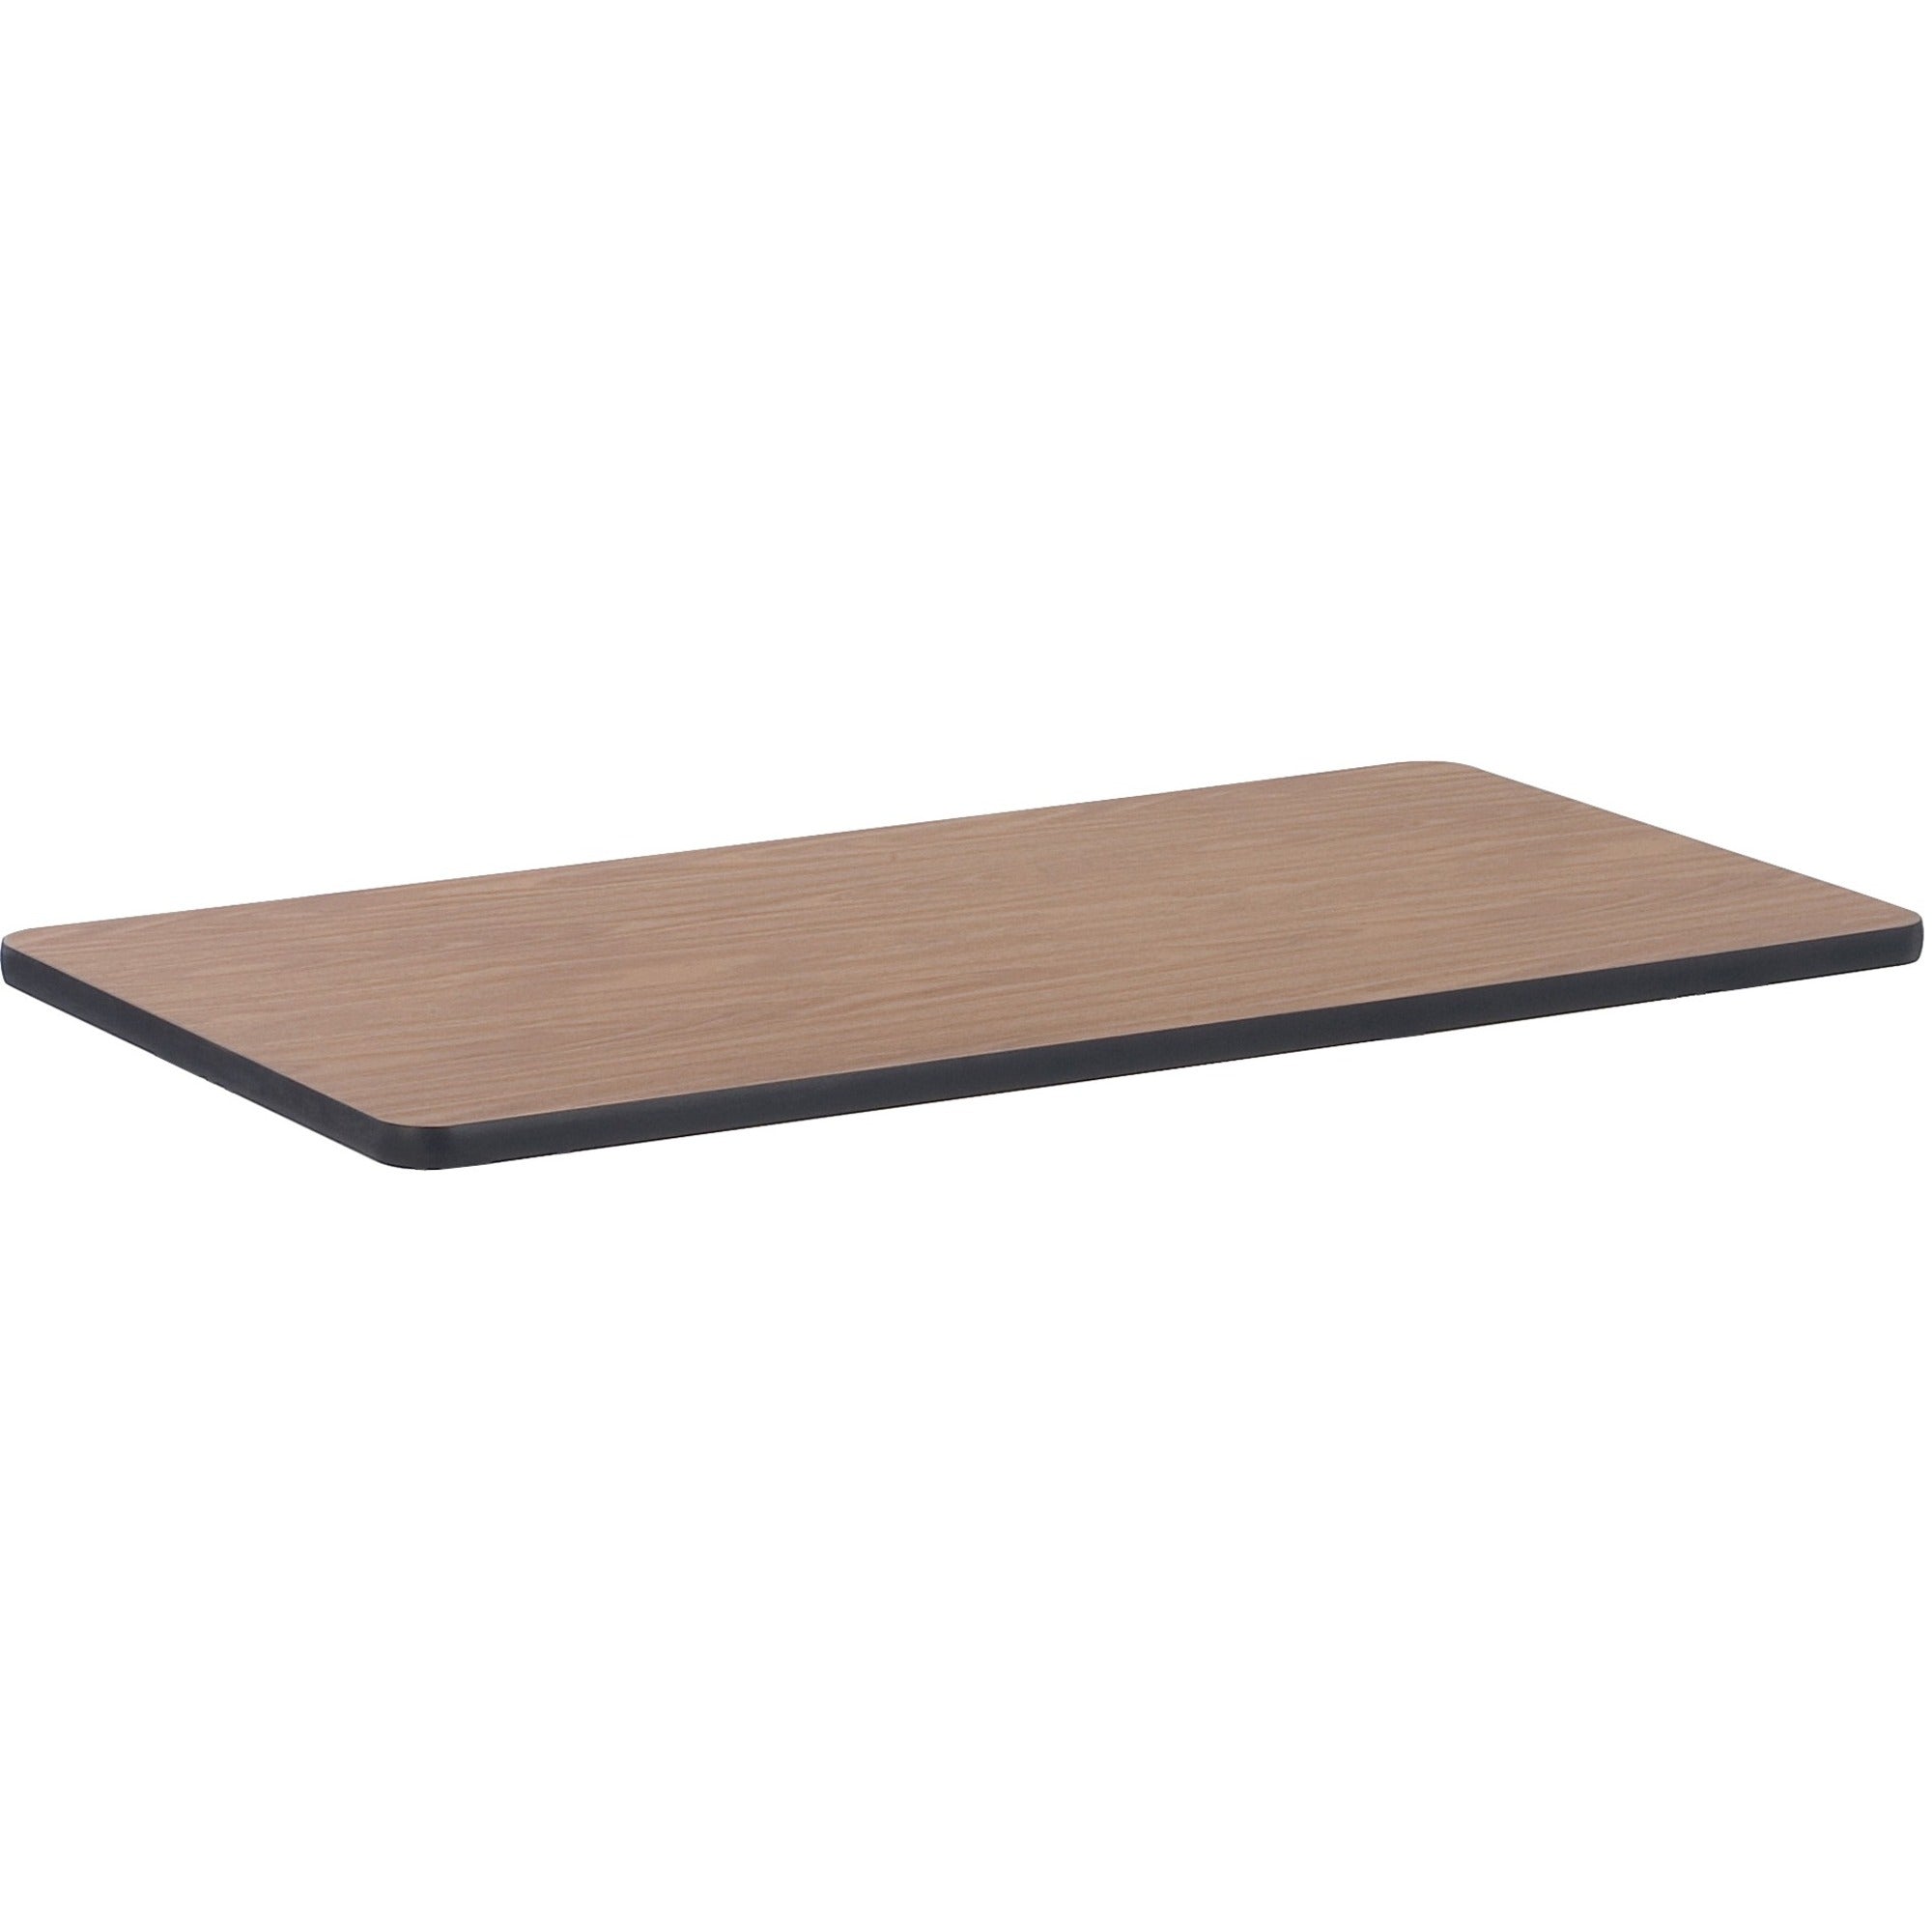 lorell-classroom-activity-tabletop-for-table-tophigh-pressure-laminate-hpl-rectangle-medium-oak-top-x-24-table-top-width-x-48-table-top-depth-x-113-table-top-thickness-assembly-required-1-each_llr99894 - 1